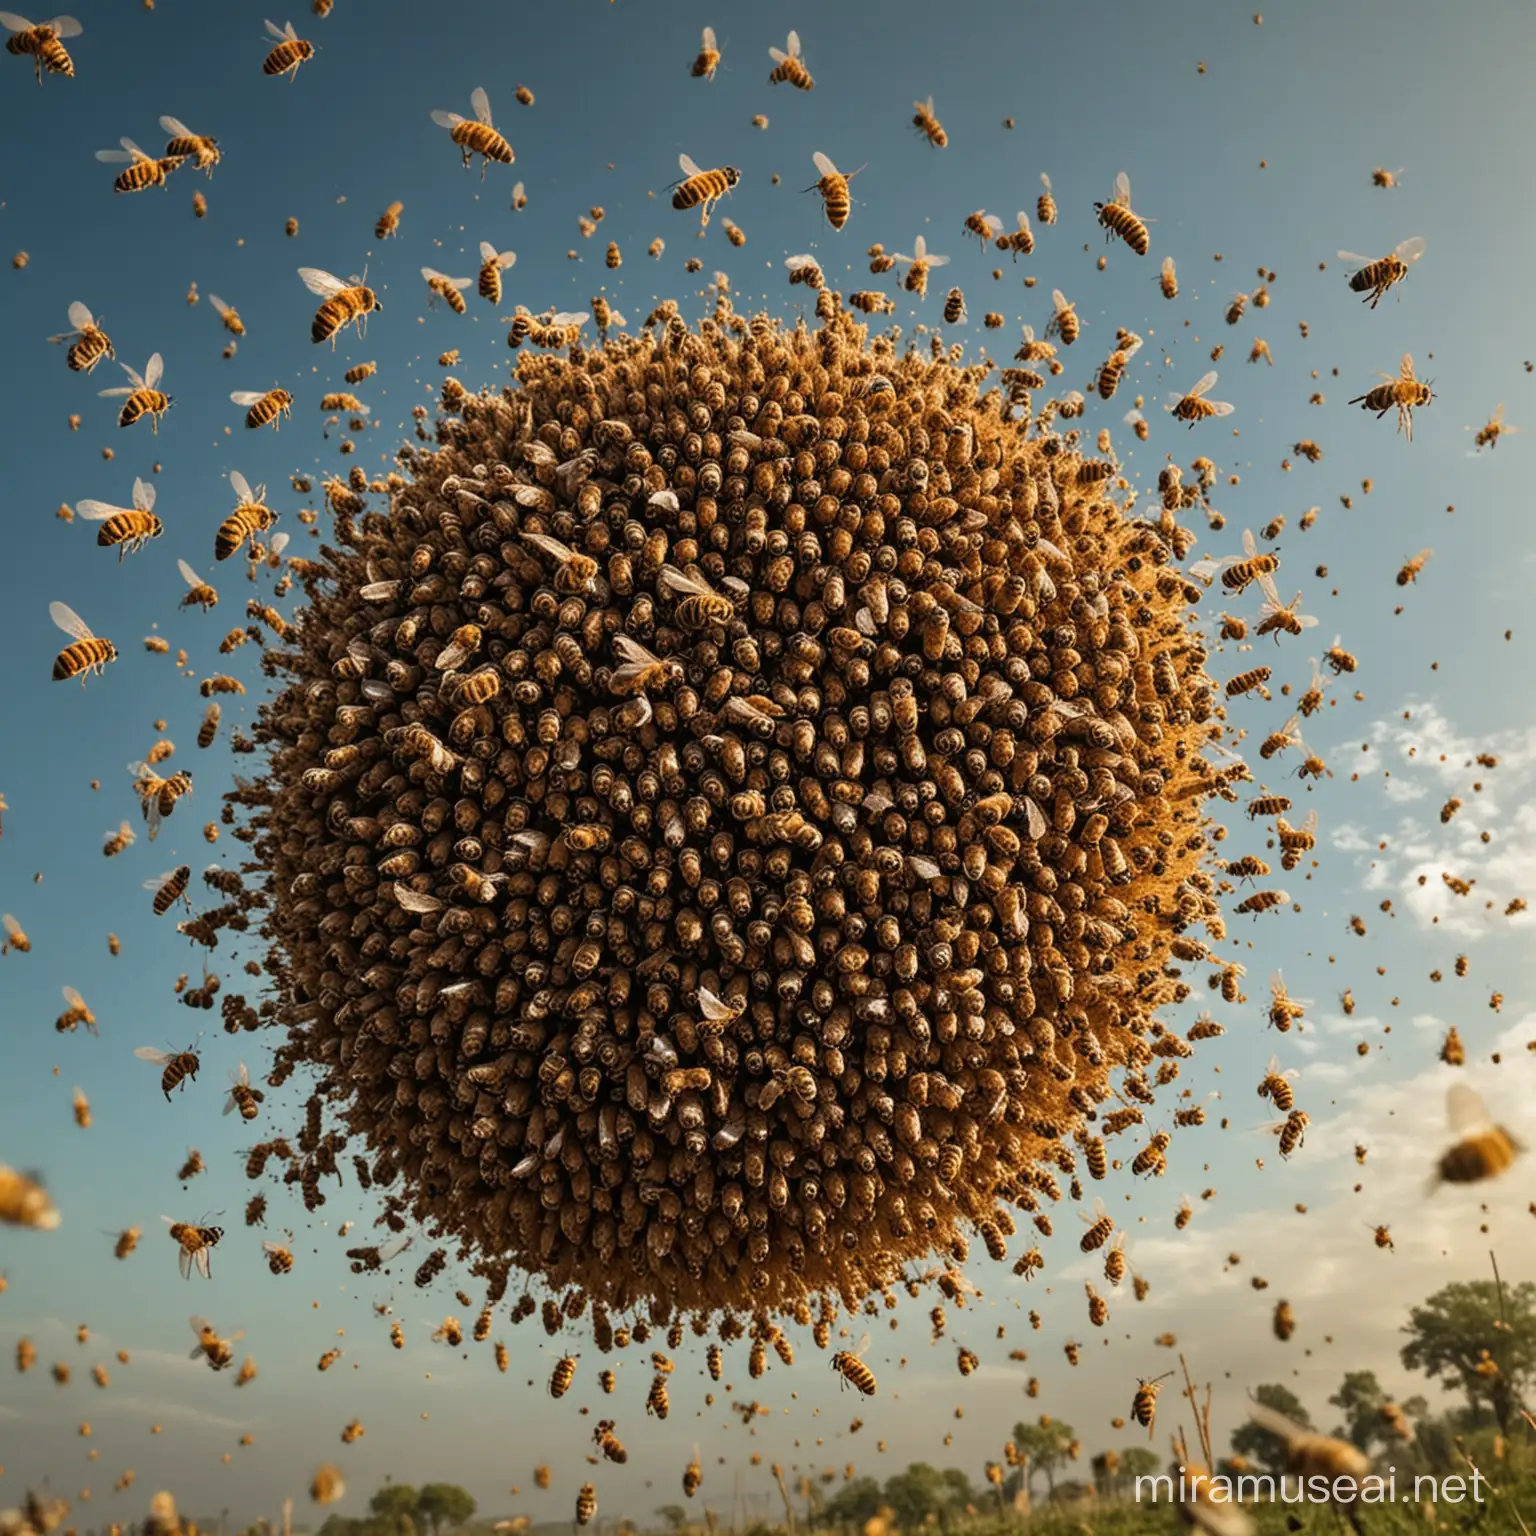 Royal Queen Surrounded by a Swarm of Bees